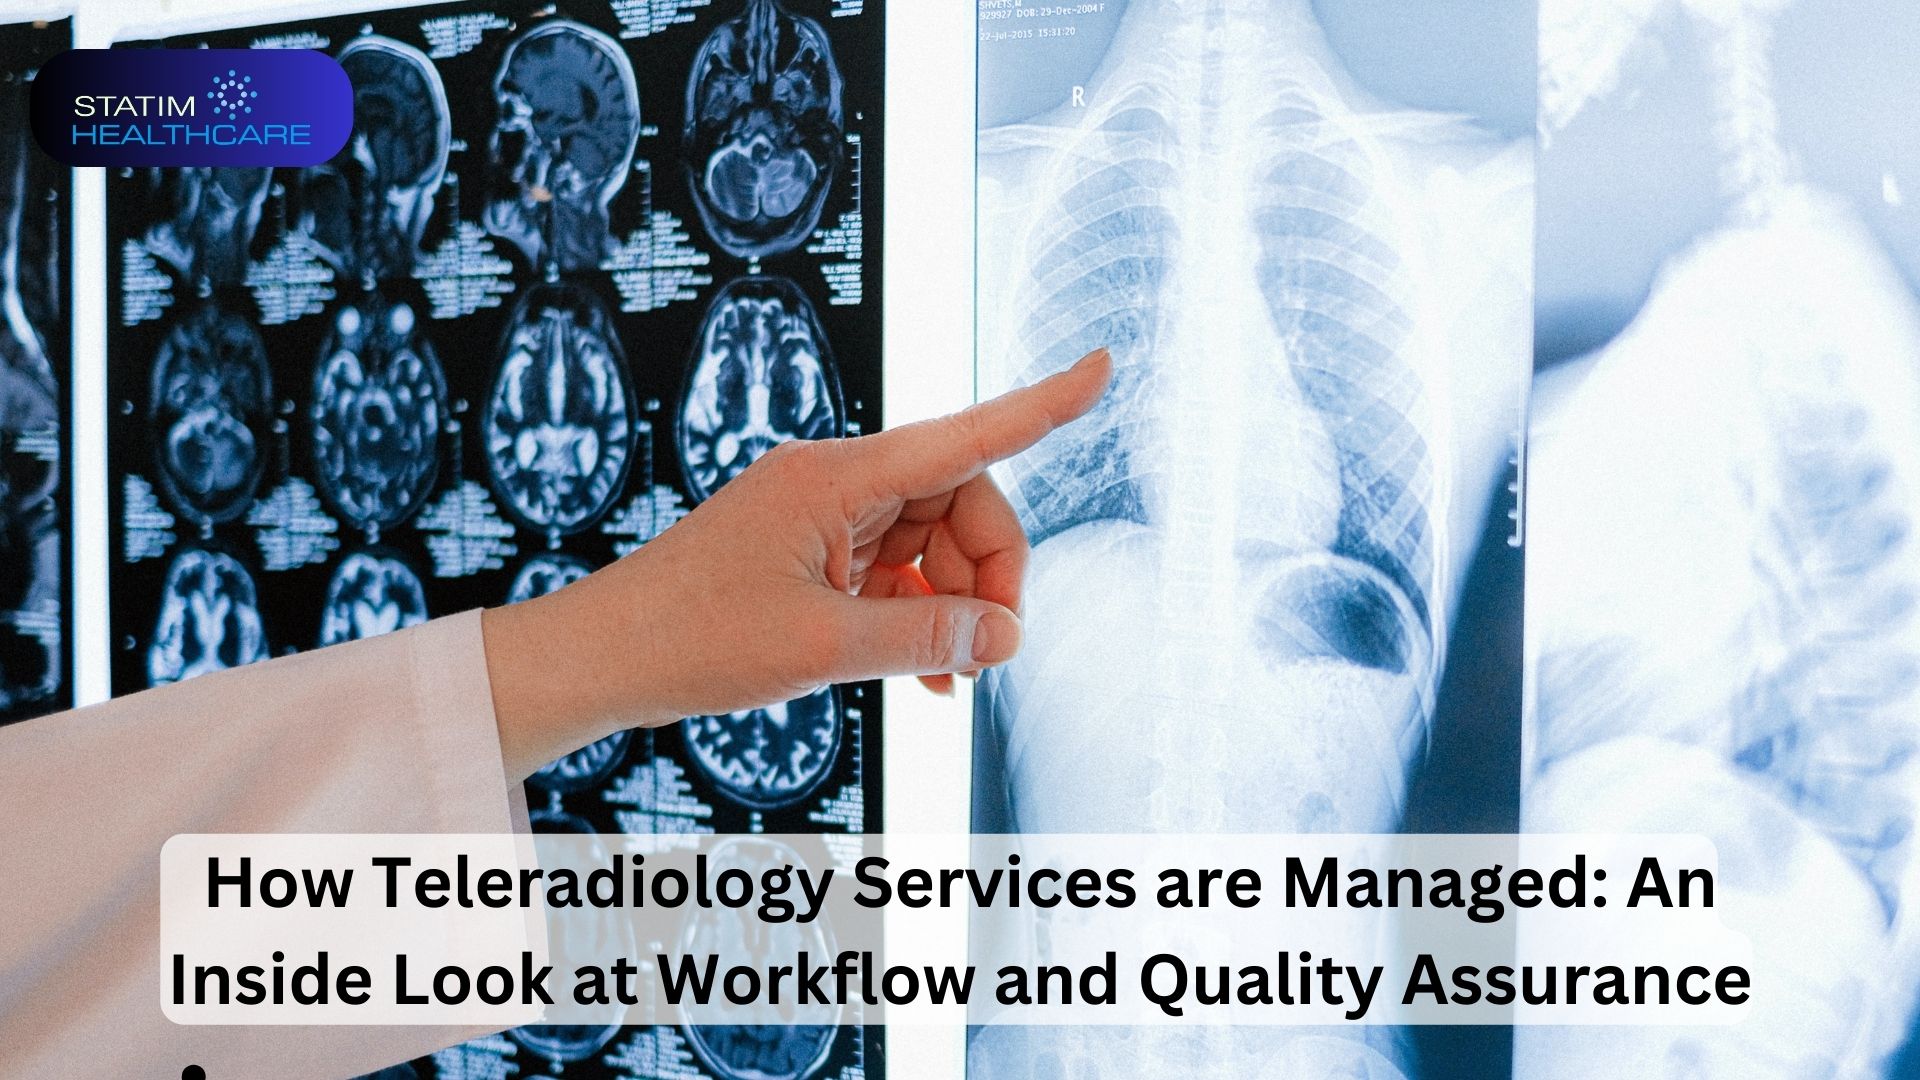 7 Types of Diagnostic Imaging Tests You May Assist with as a Radiologic Technologist